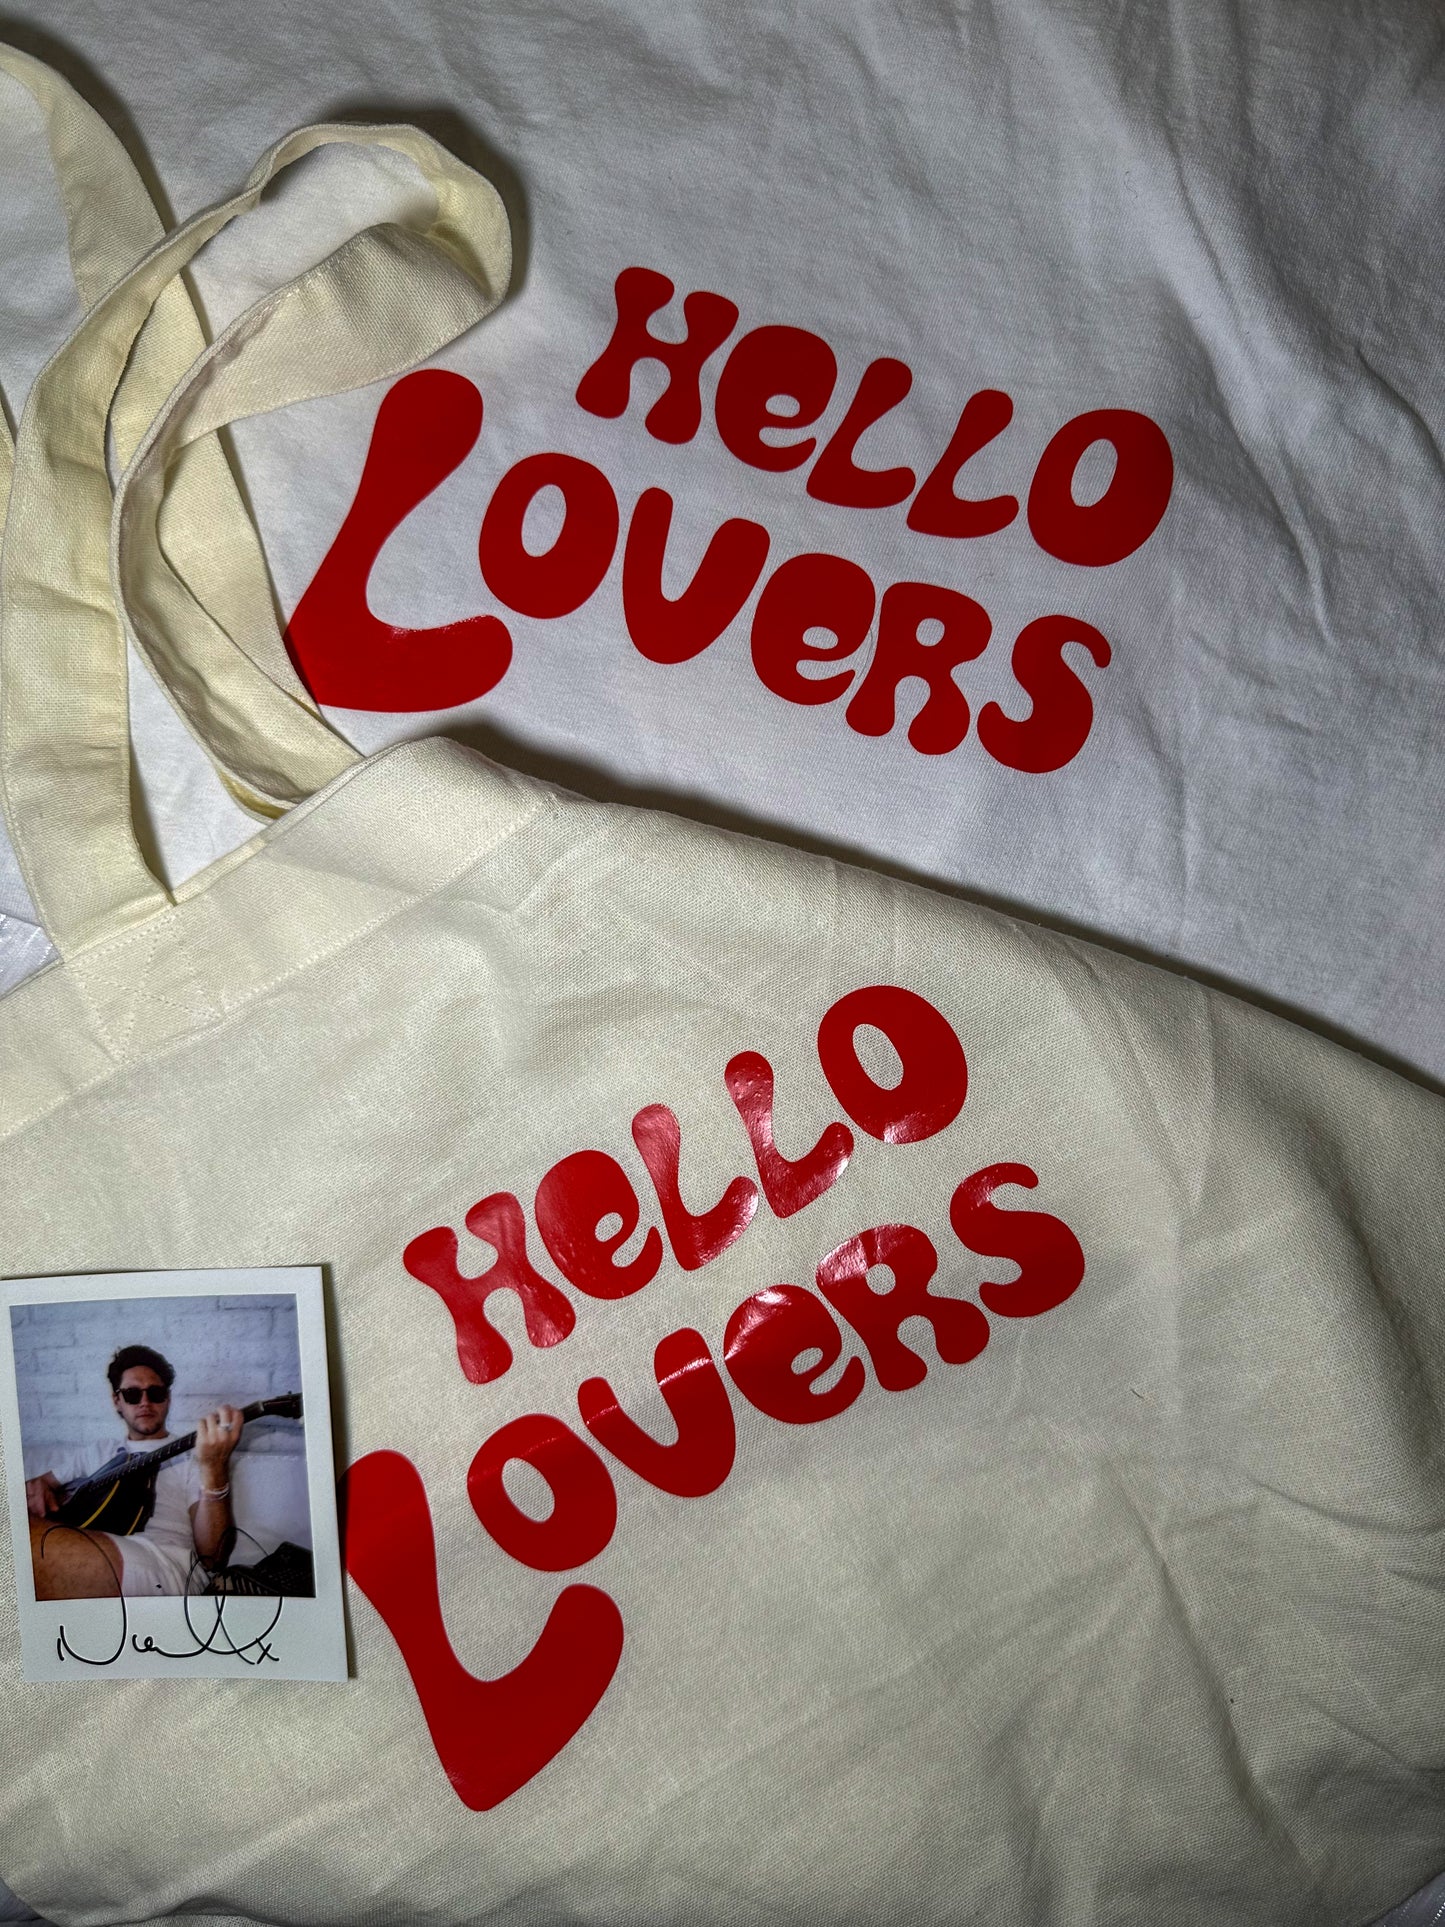 Hello Lovers/The Show Tote/Tee Niall Horan Flower design